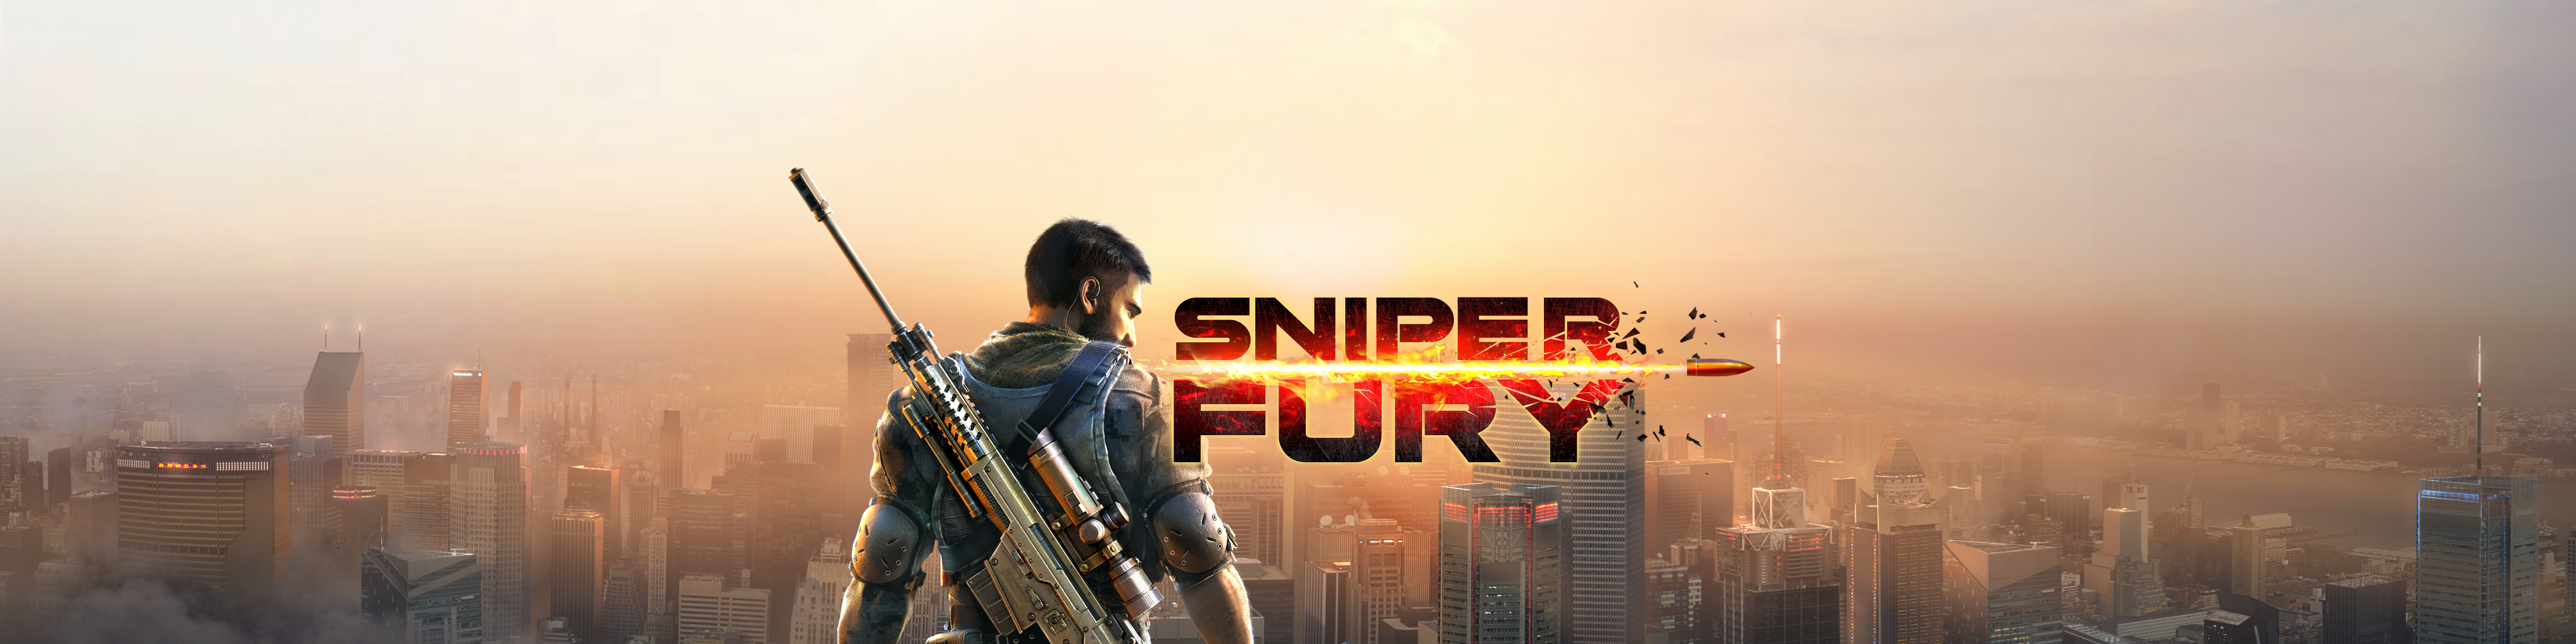 Sniper Fury Overview Apple App Store Us - fury roblox id